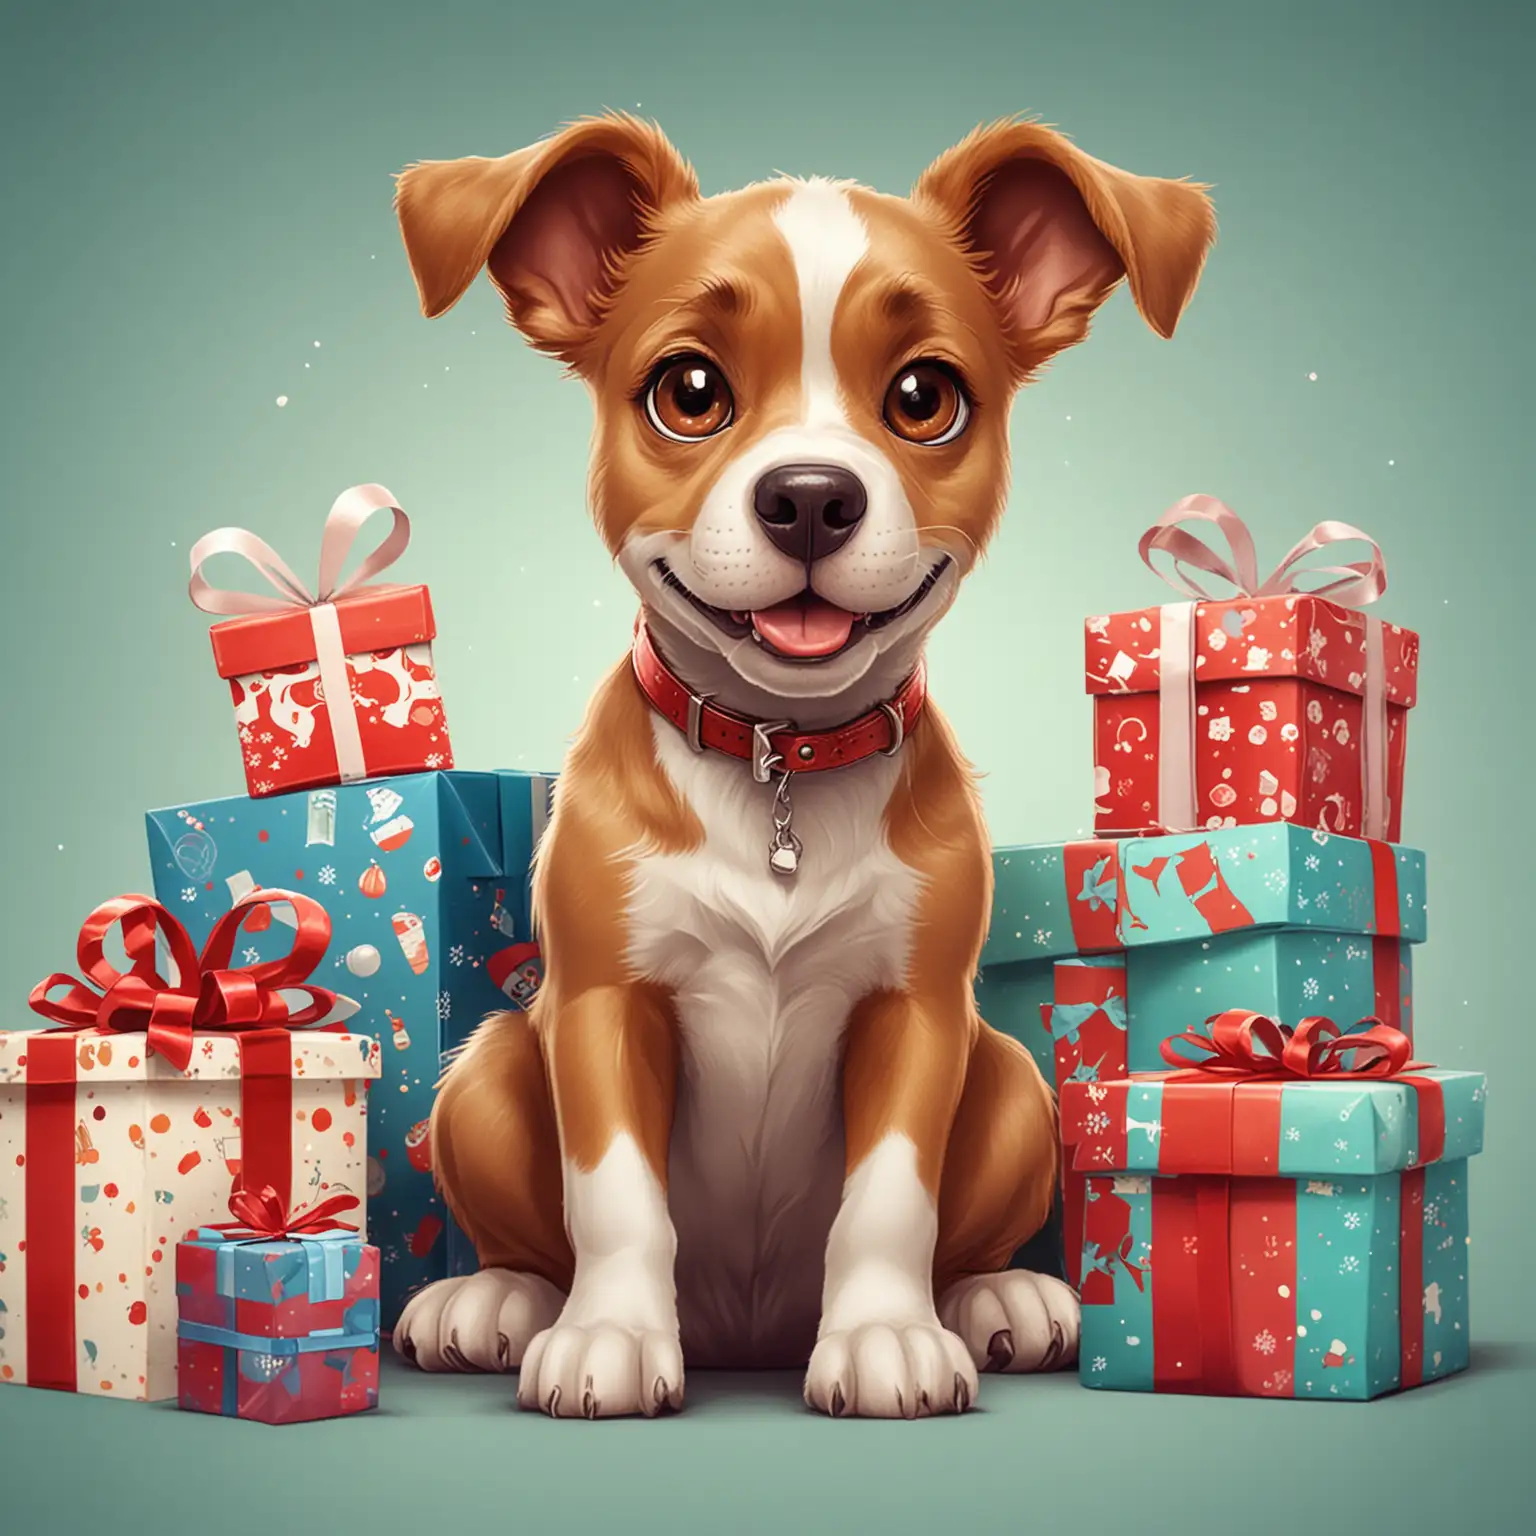 Cheerful-Cartoon-Dog-Surrounded-by-Presents